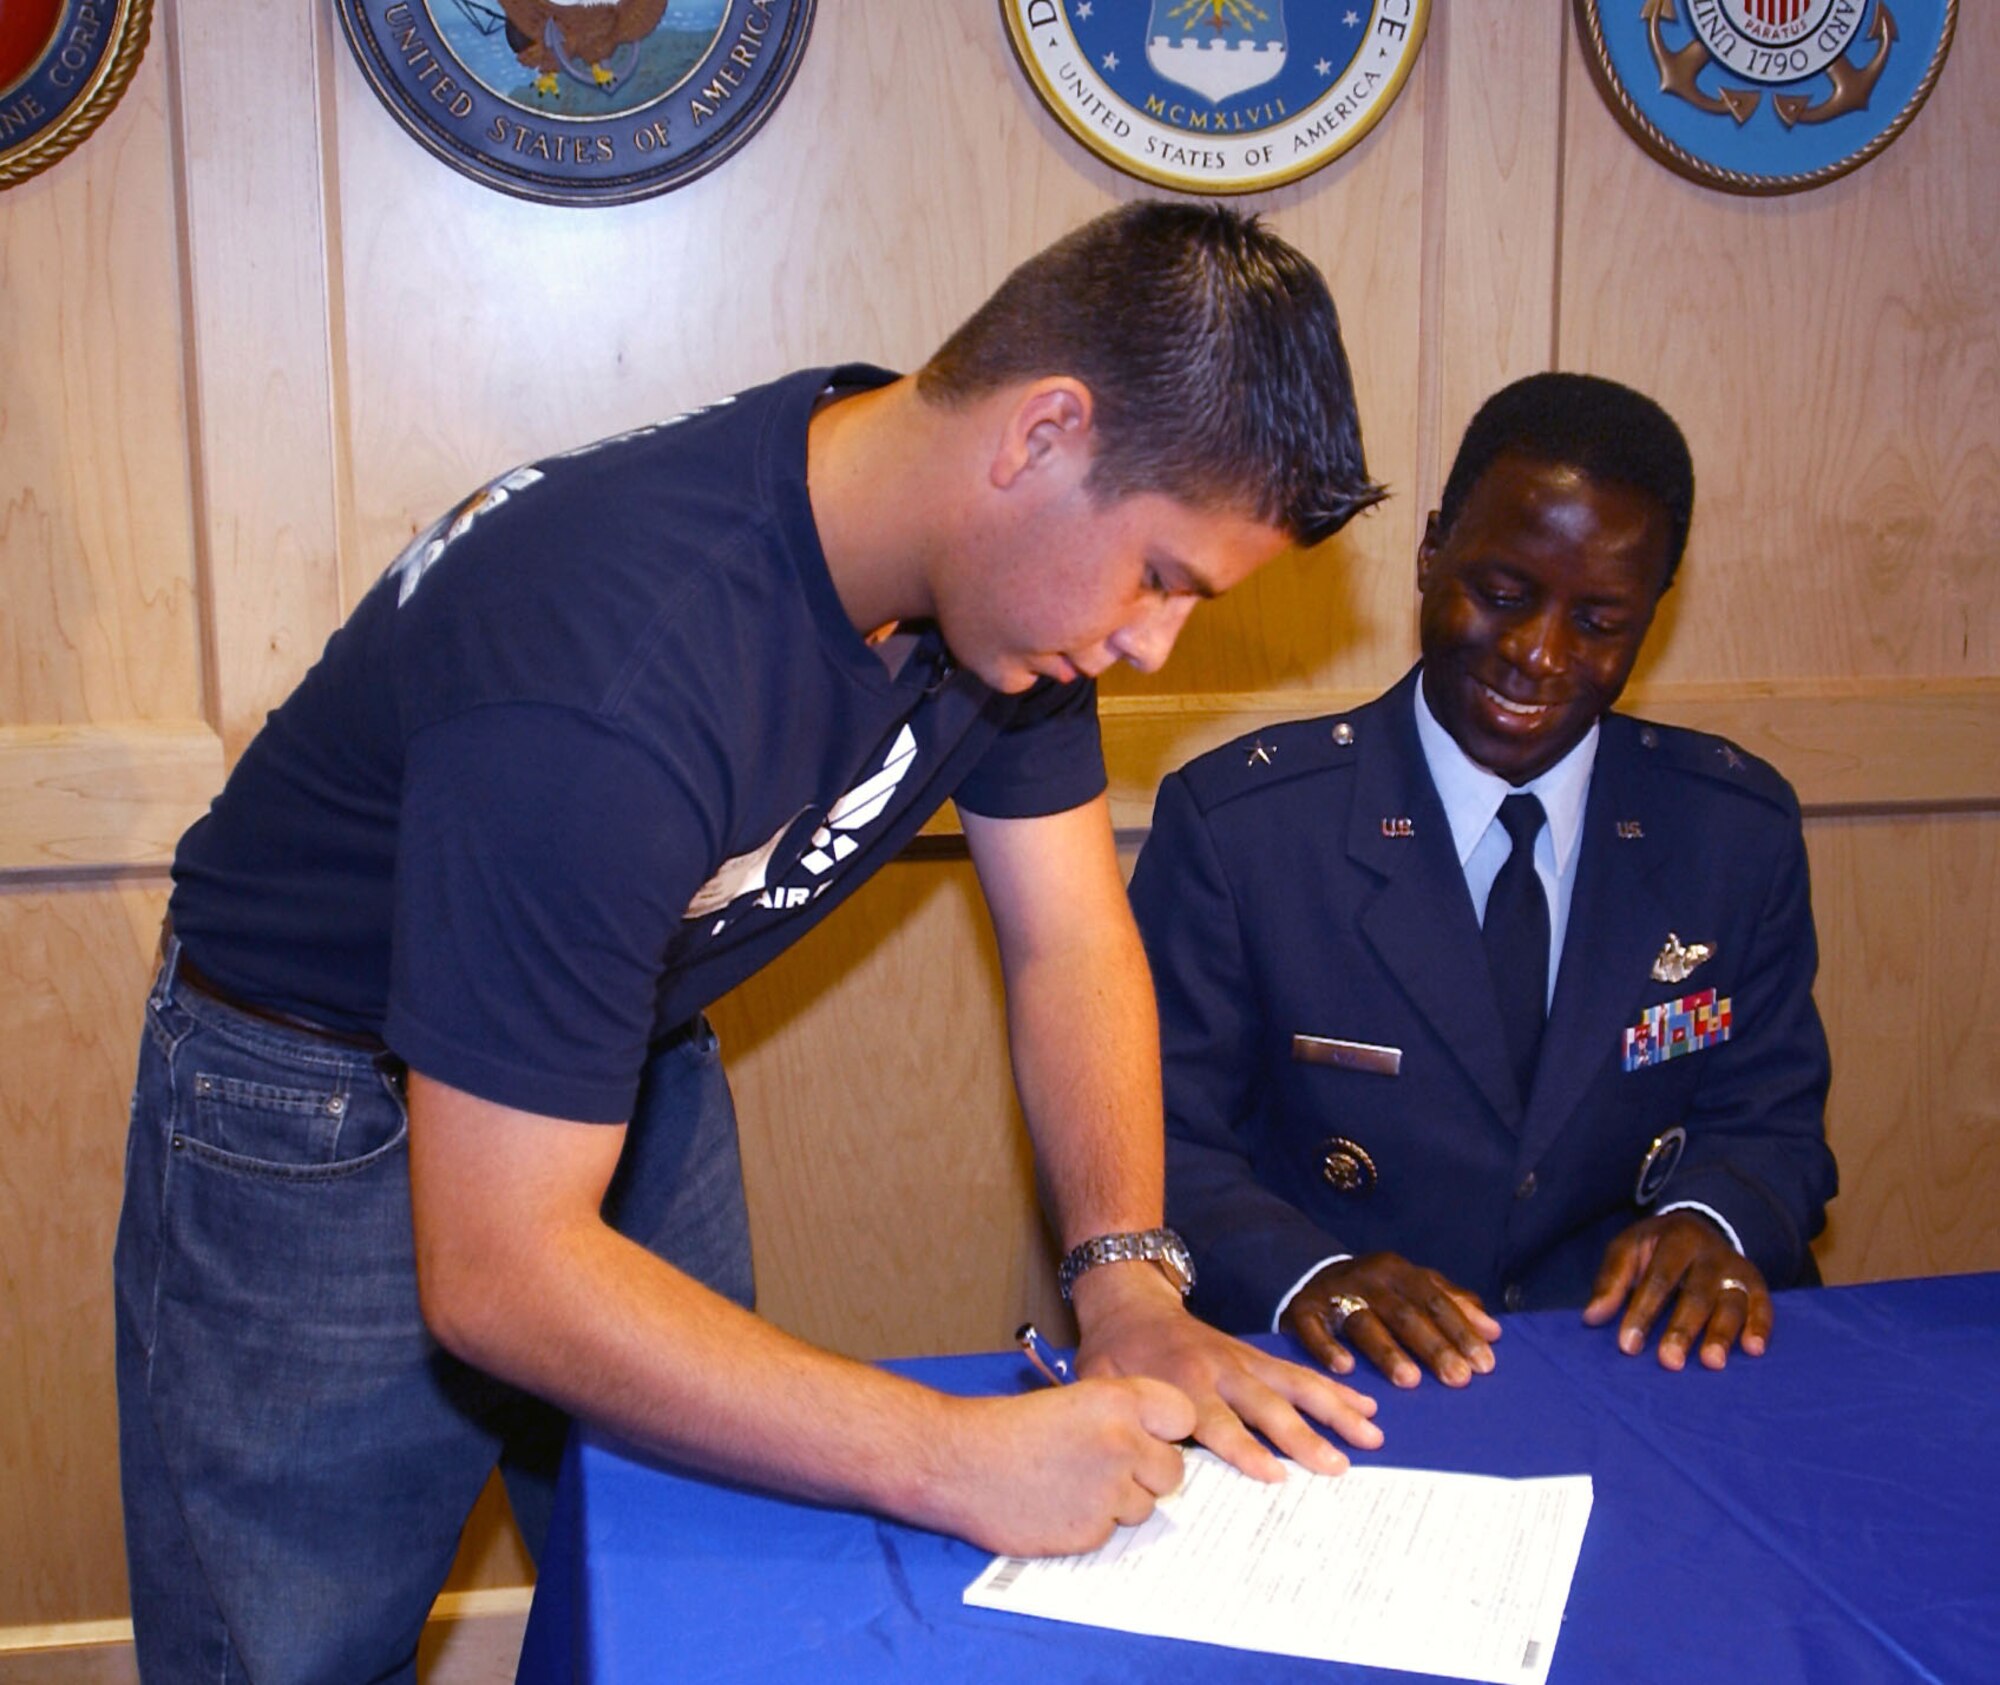 SAN ANTONIO -- Hector Baretto signs his Air Force enlistment contract, witnessed by Brig. Gen. Edward A. Rice Jr., Air Force Recruiting Service commander.  Baretto is the first Air Force 15-month enlistee under the National Call to Service program.  (U.S. Air Force photo by Angelica Delgado)